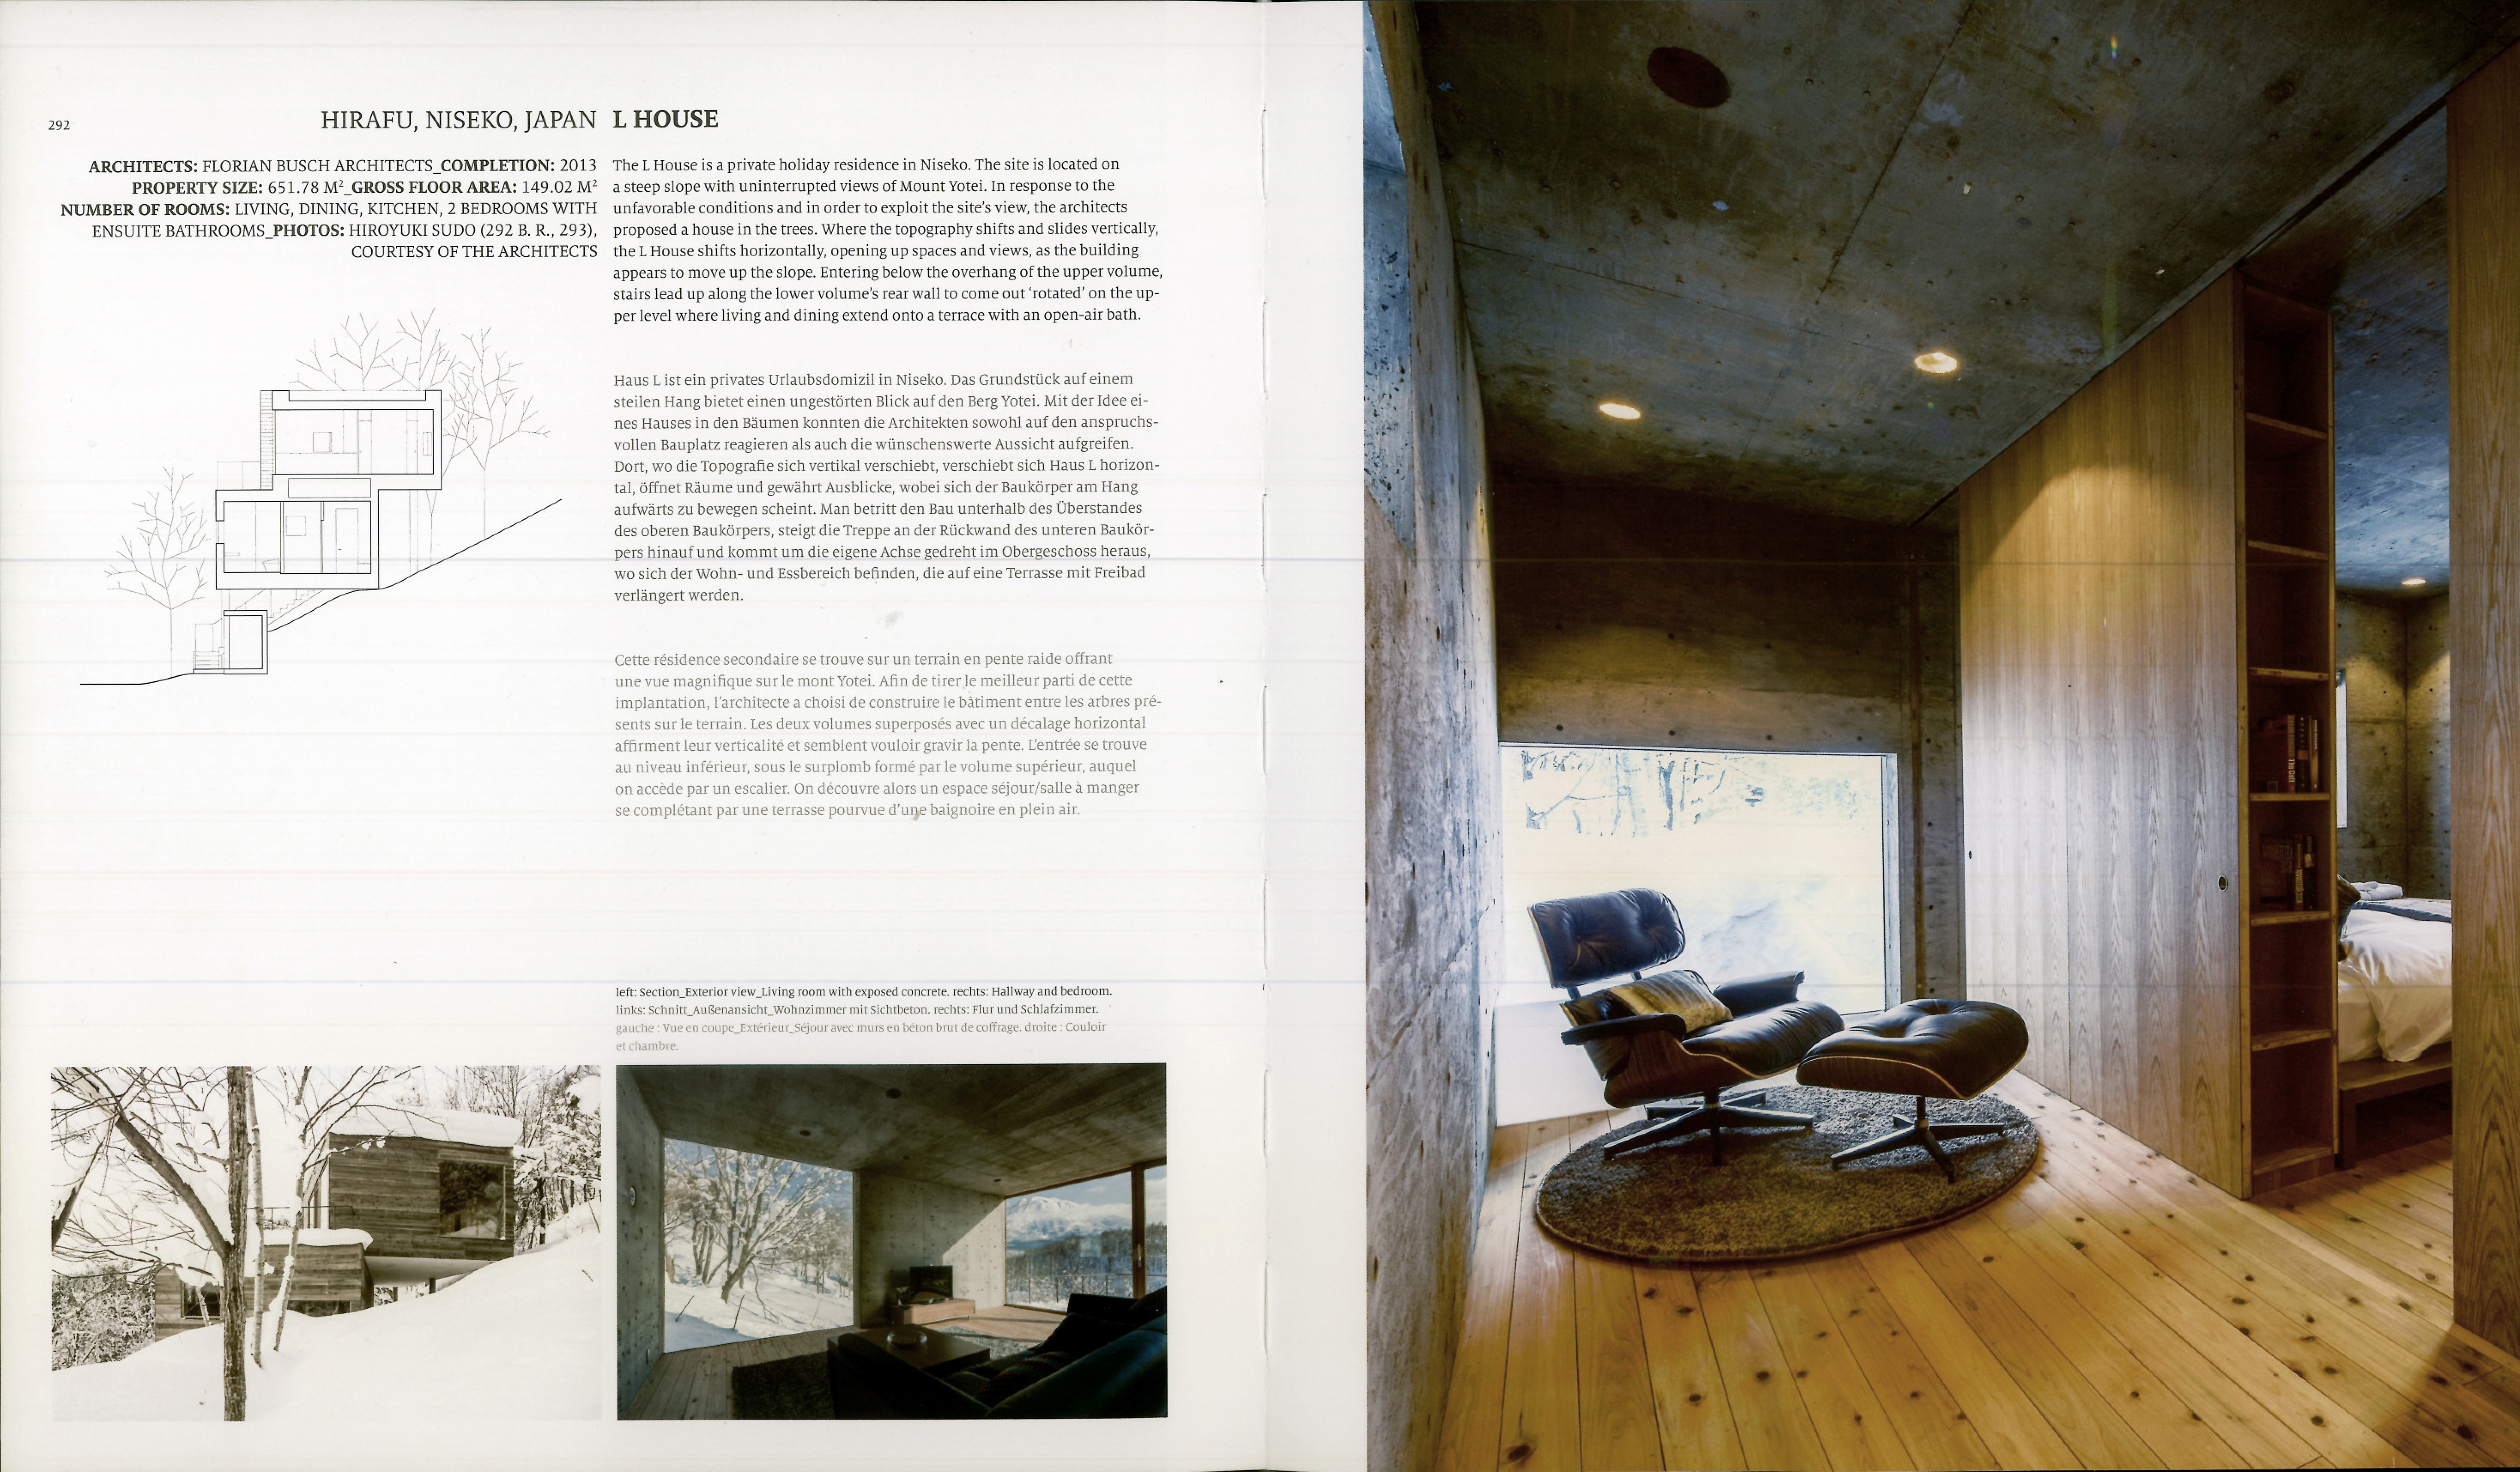 "L House" in Chalets: Trendsetting Mountain Treasures